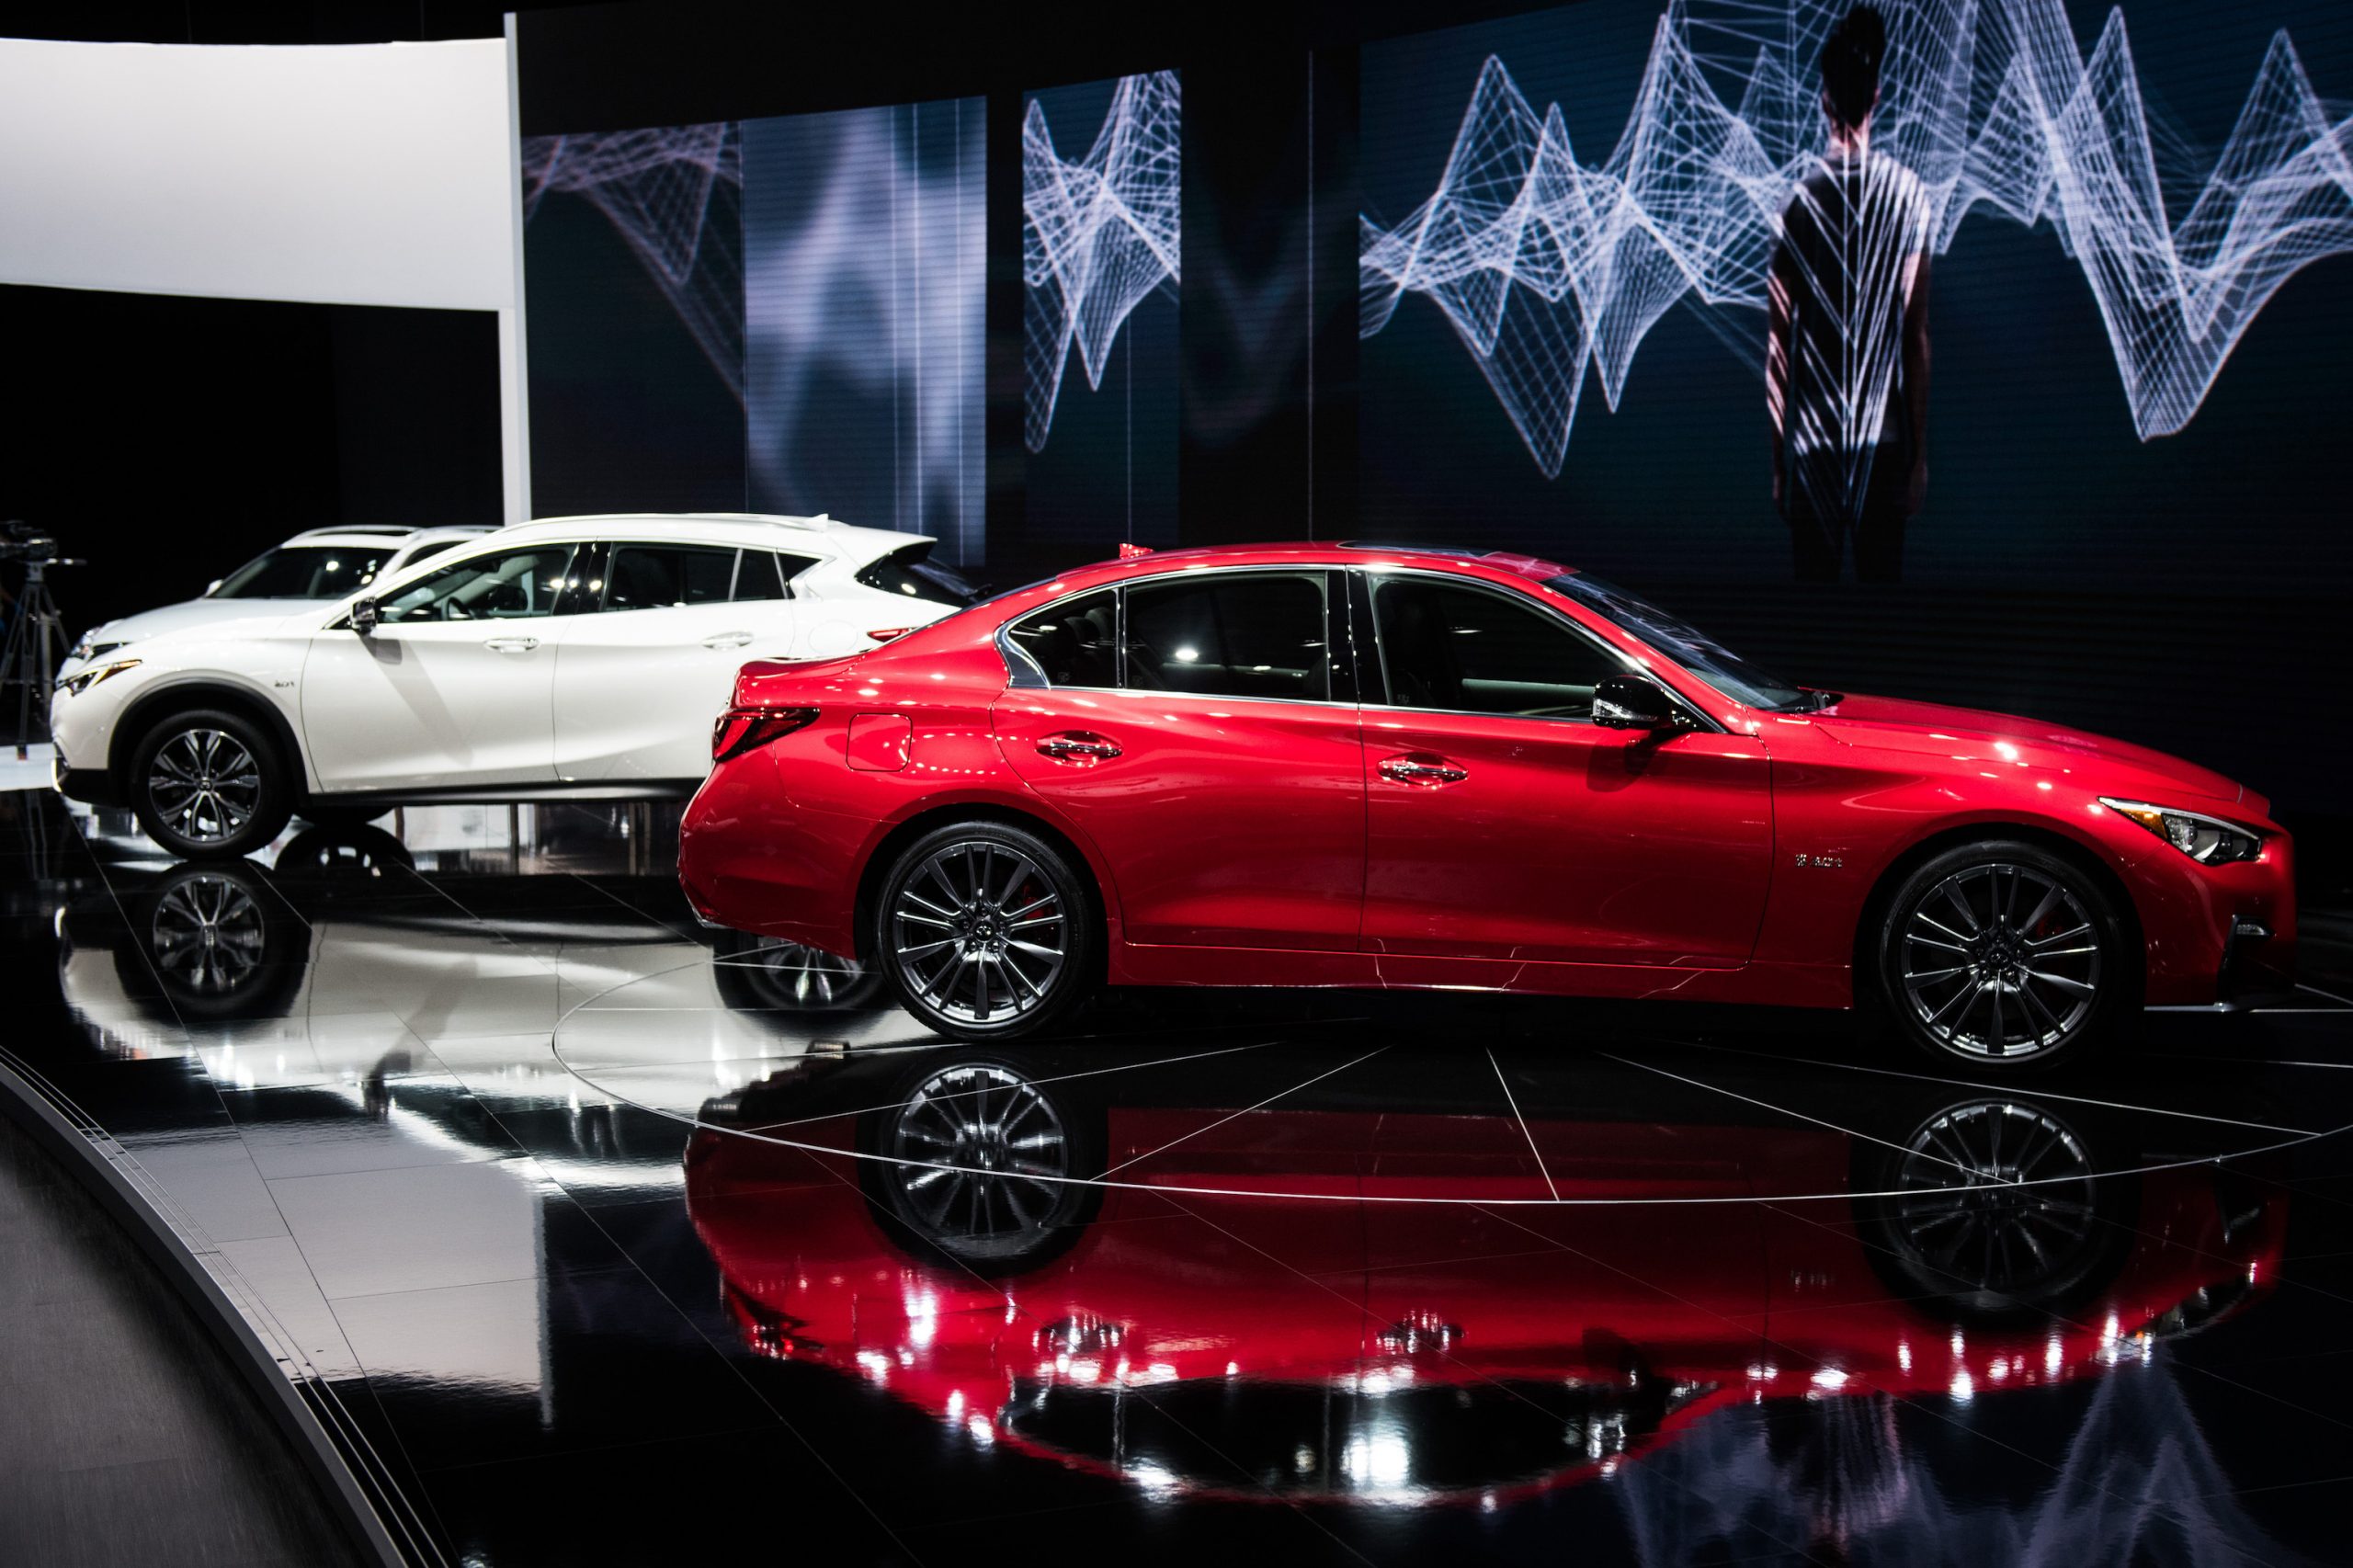 A Nissan Motor Co. Infiniti brand Q50 S vehicle, right, is displayed during the 2017 New York International Auto Show